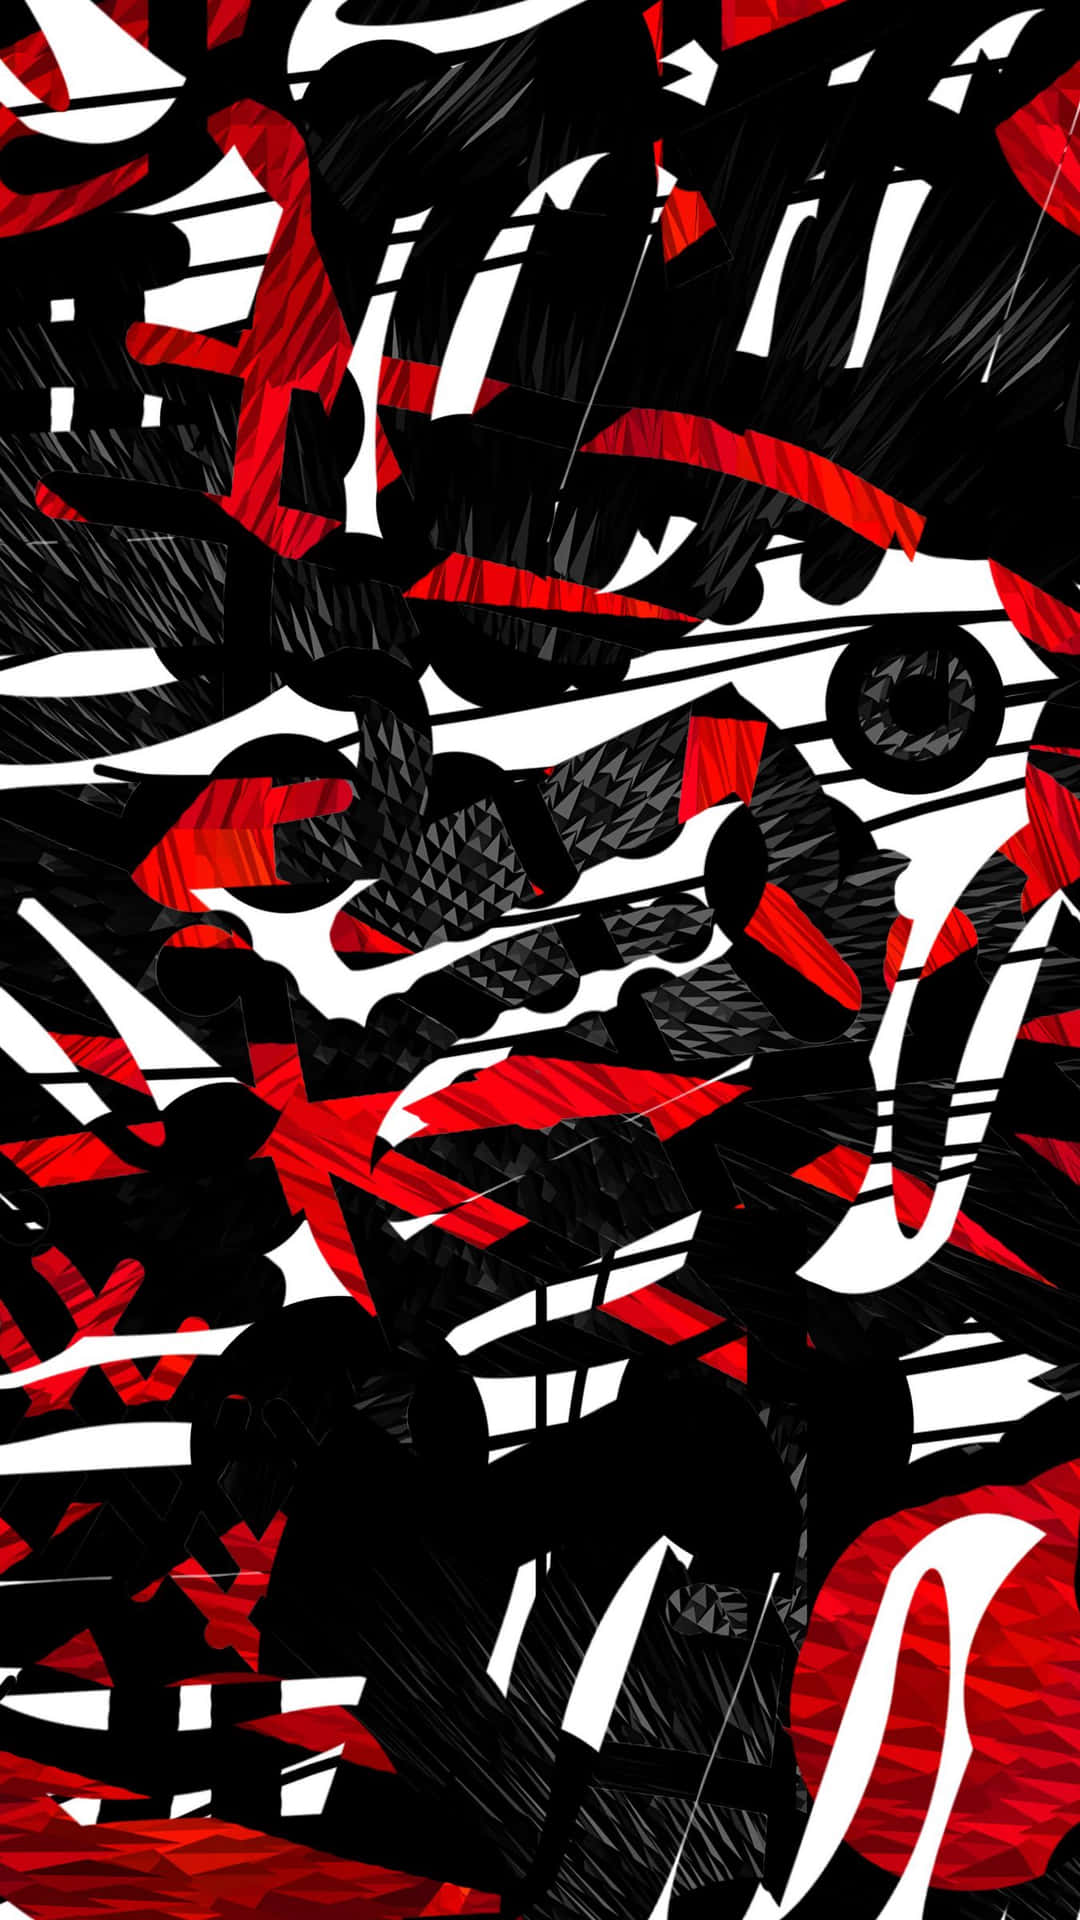 Abstract Design in Red, White, and Black Wallpaper